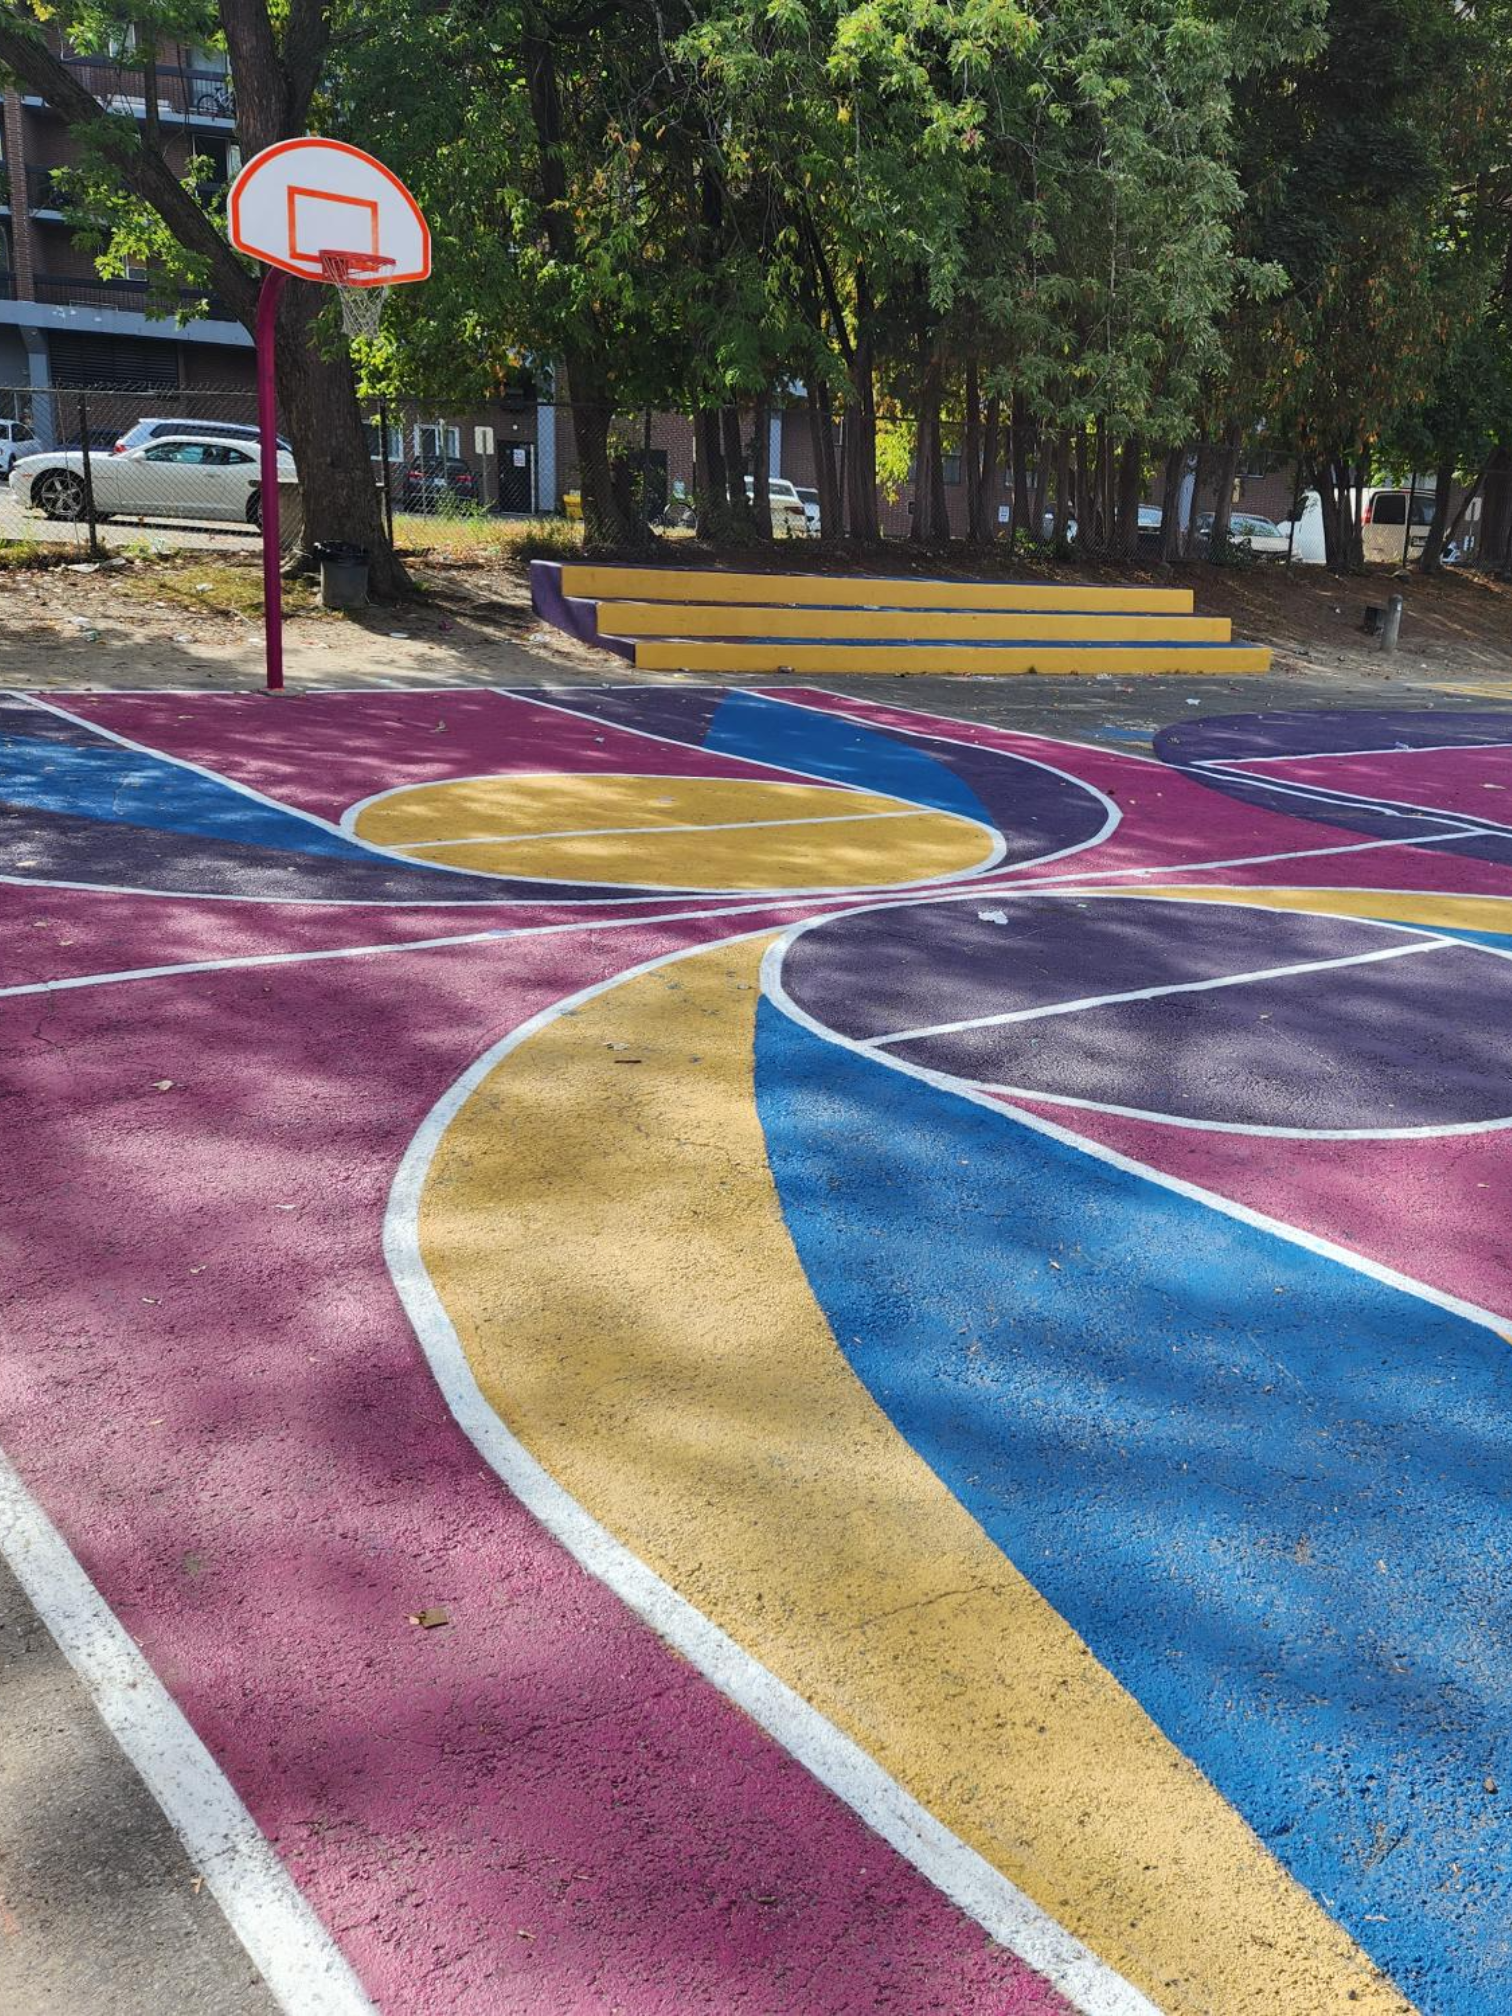 Basketball court painted by volunteers